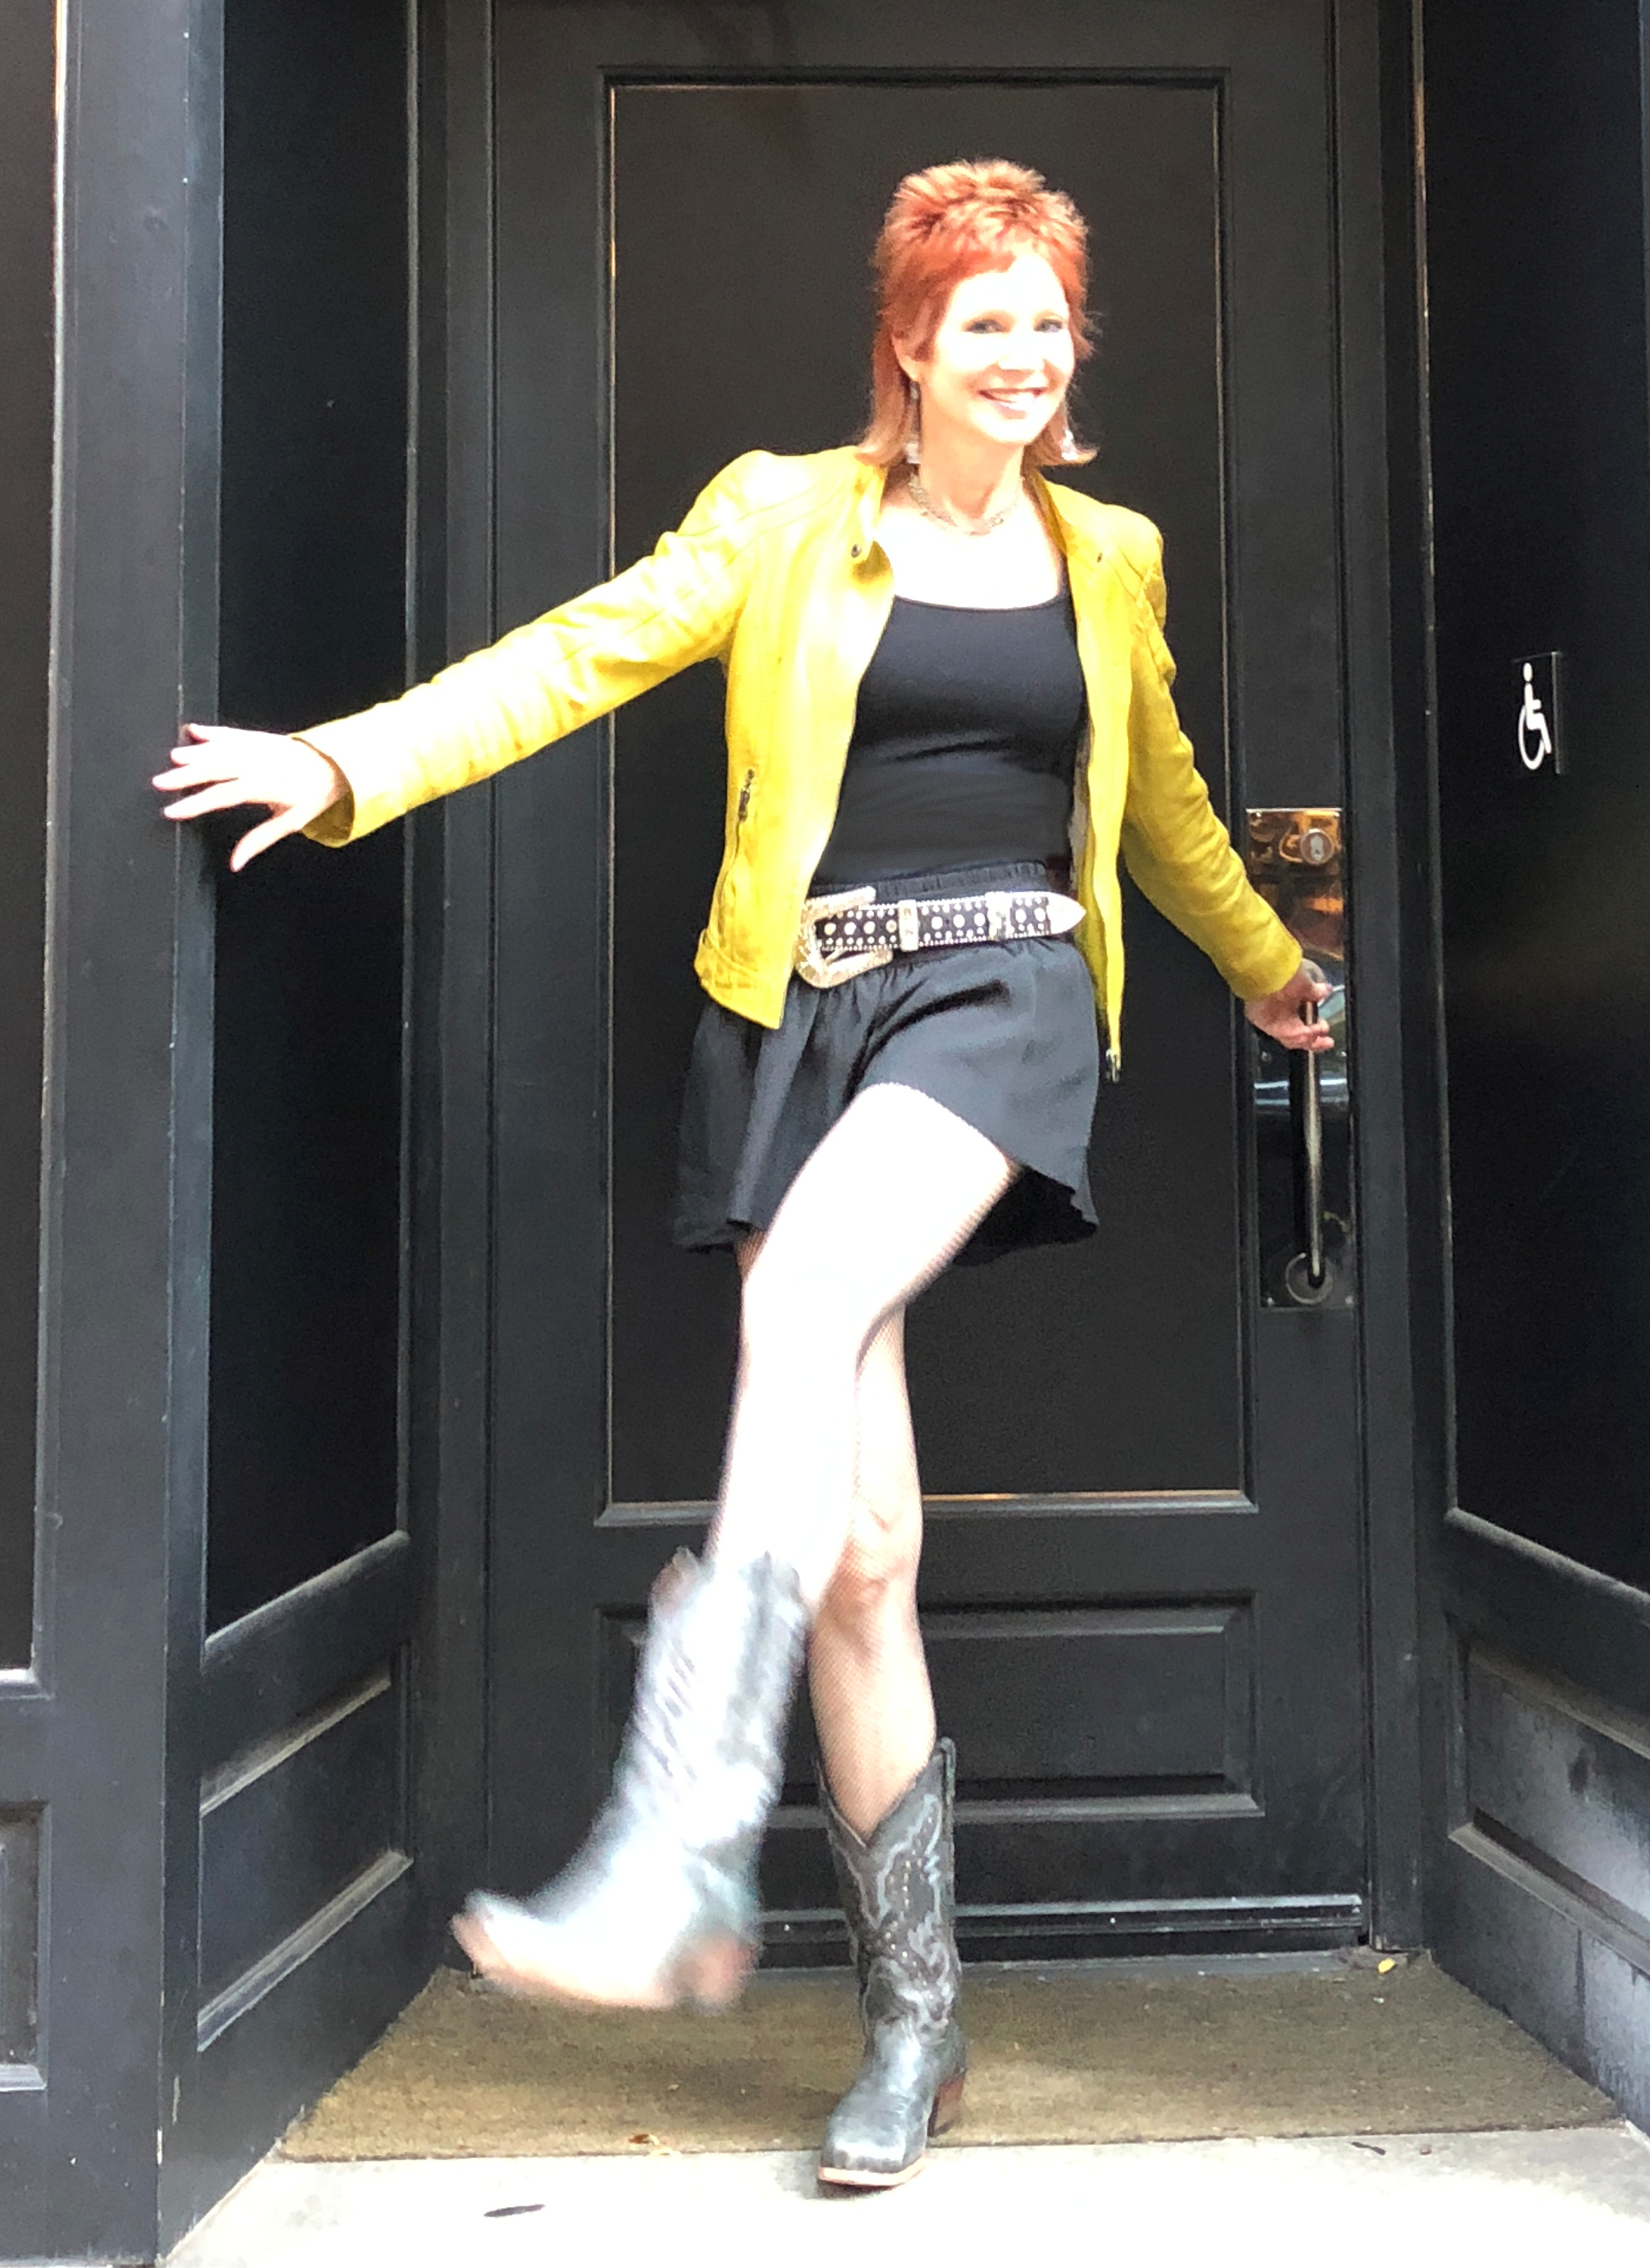 Karen's Quirky Style - West Village Model Karen Rempel stepping out in Western style